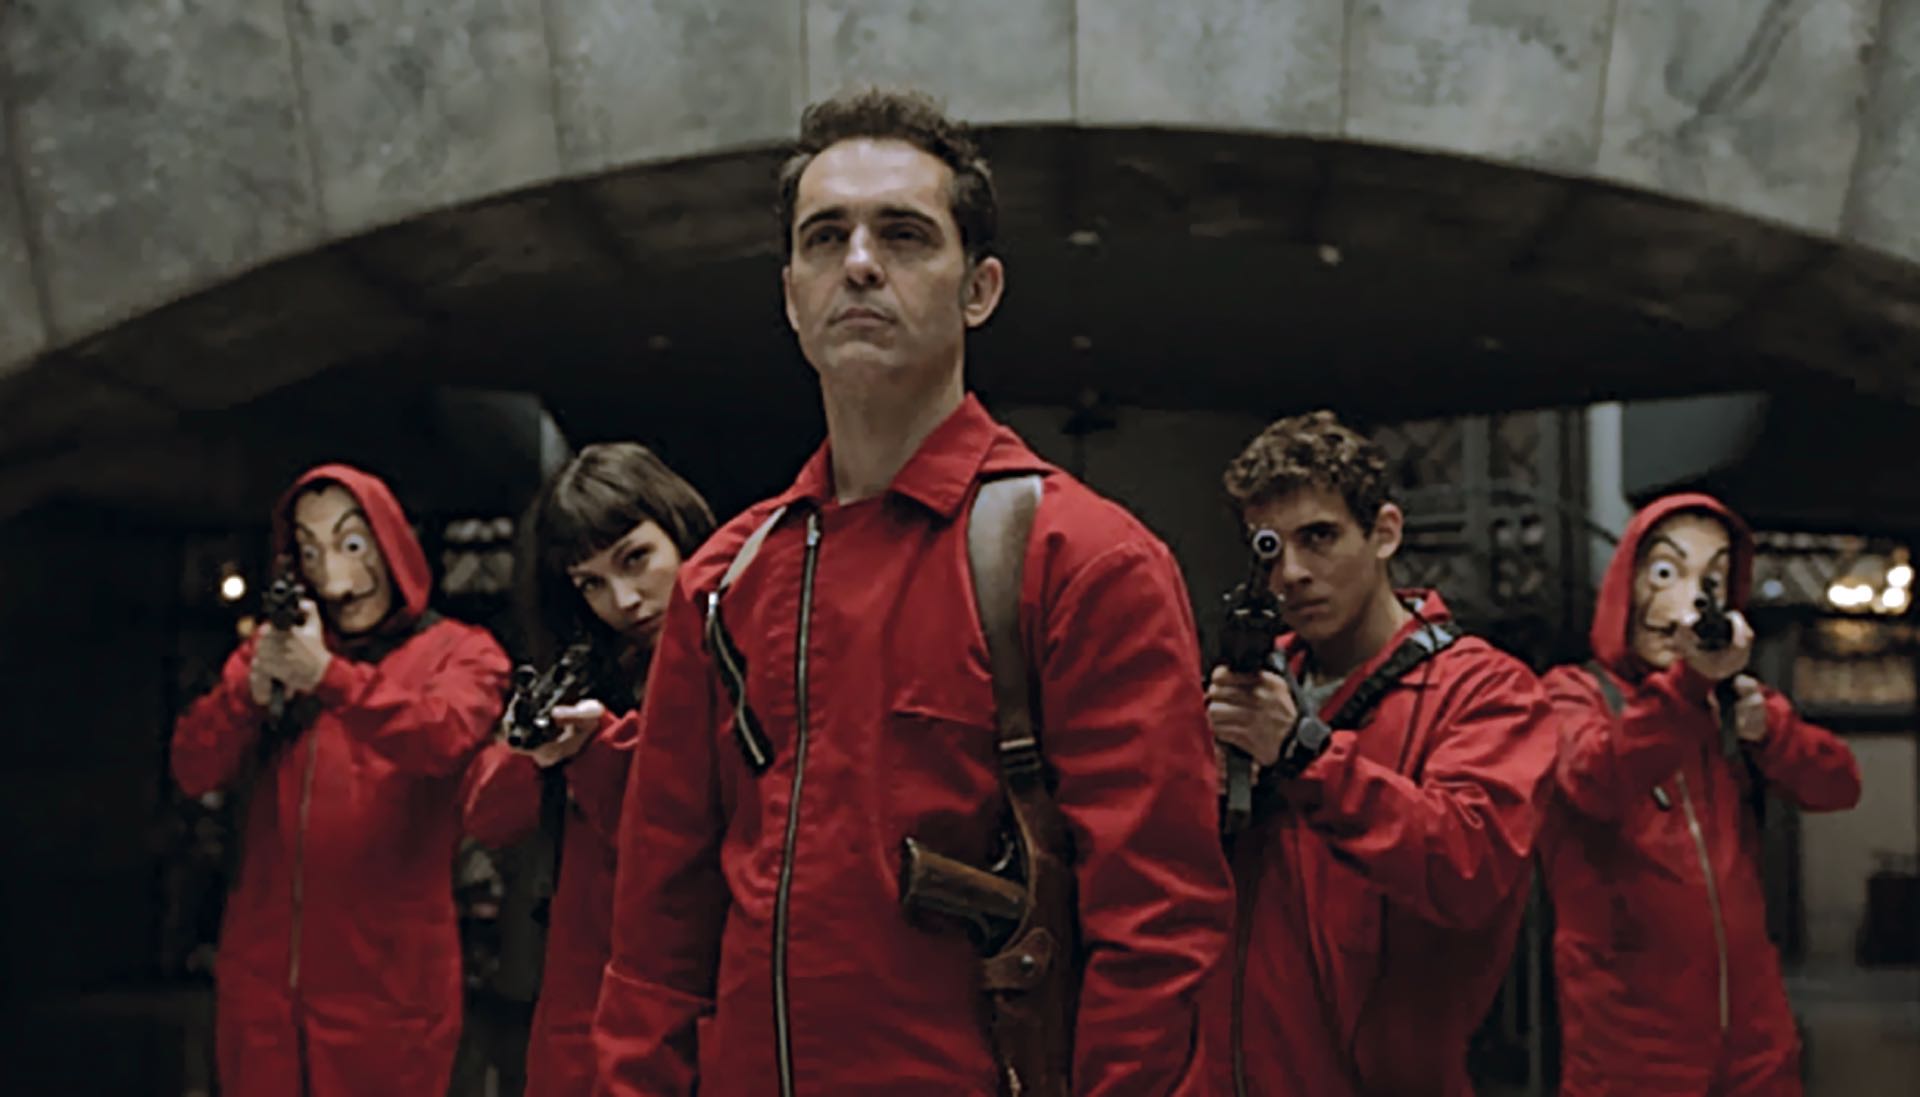 ammunition fry famous Everything we know about “Berlin”, the spin off of La Casa de Papel -  Infobae